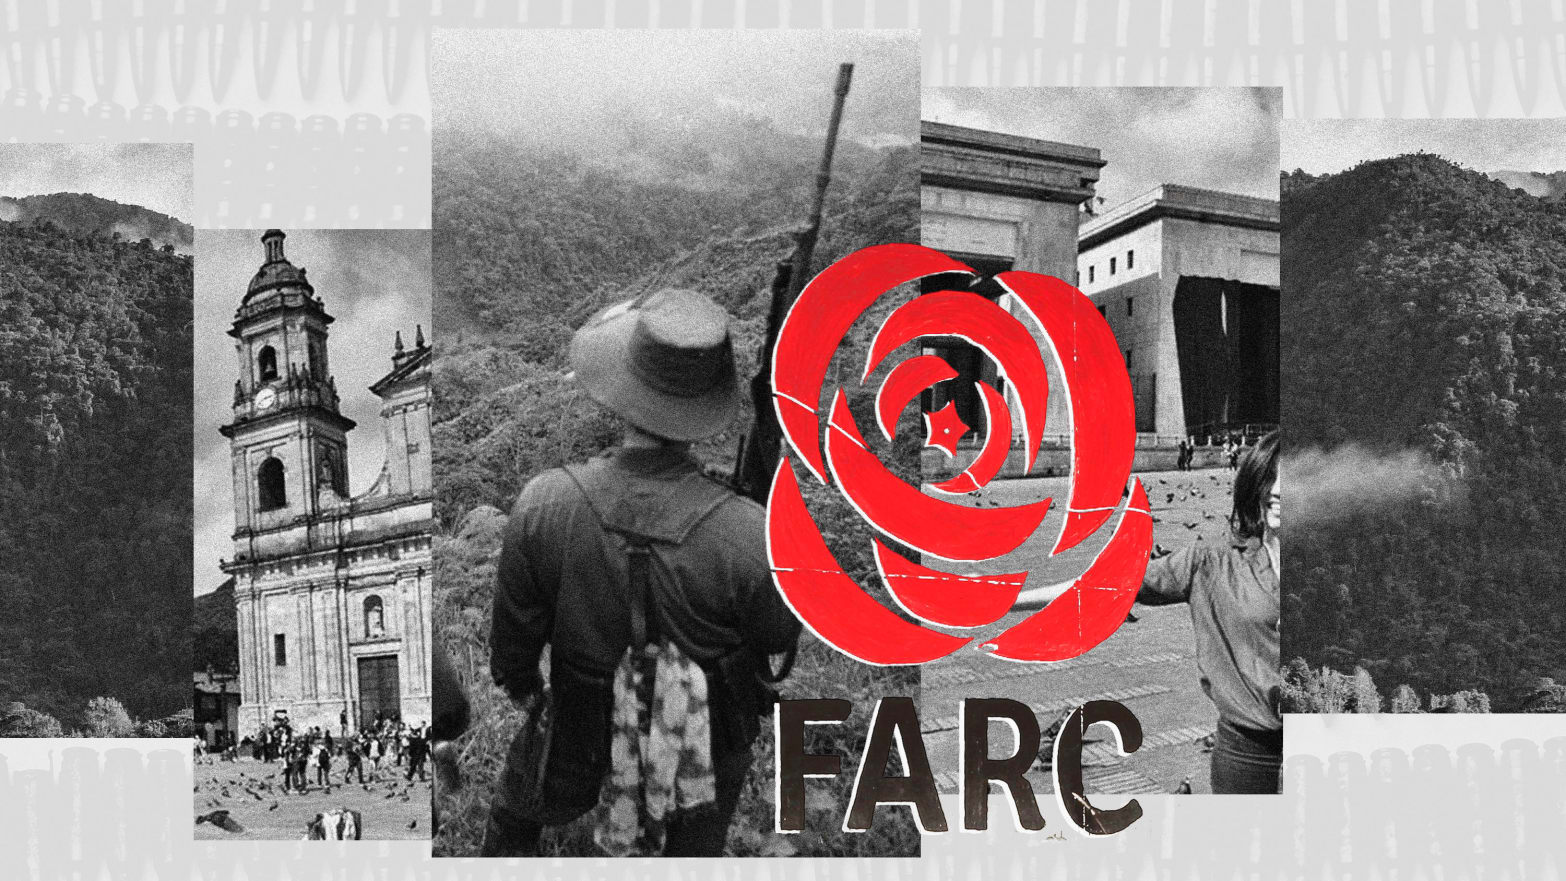 A photo illustration showing the FARC symbol with images from Colombia areas that were occupied by FARC and an image of Nikki Vargas in Bogota.